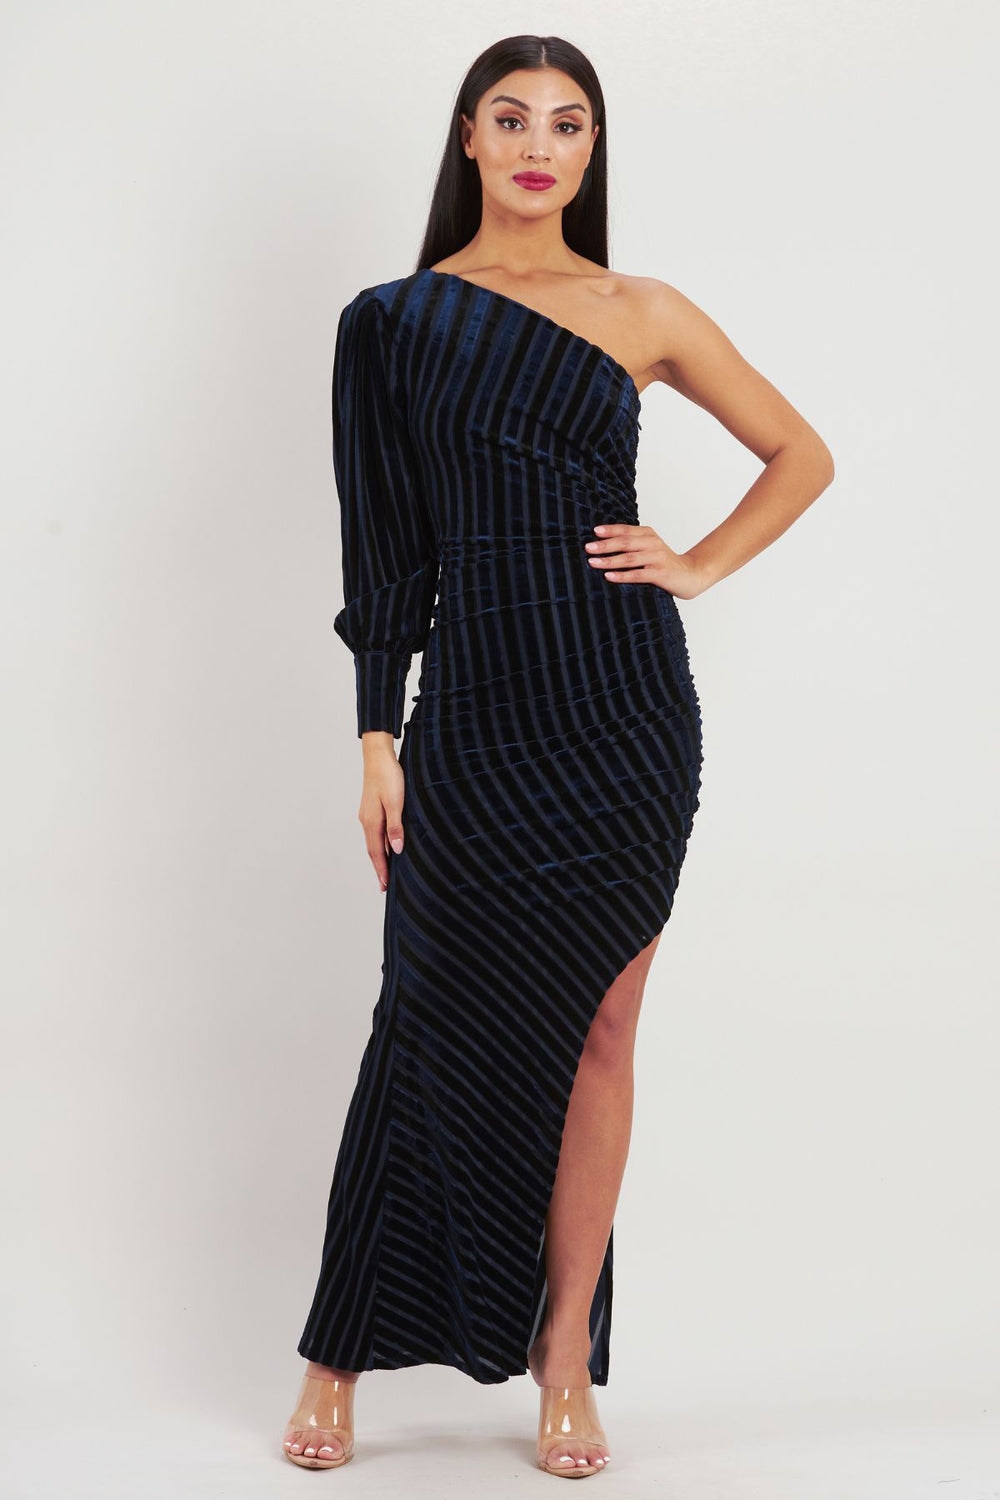 Make an impression in the Addison Maxi Dress by Romance. With its one sleeve design and figure hugging and flattering silhouette this dress certainly exudes timeless glamour.  Brand : Romance Style Code : RM231101 Colour : Navy Midweight Moderate stretch One shoulder neckline Single sleeve with button cuff Side split